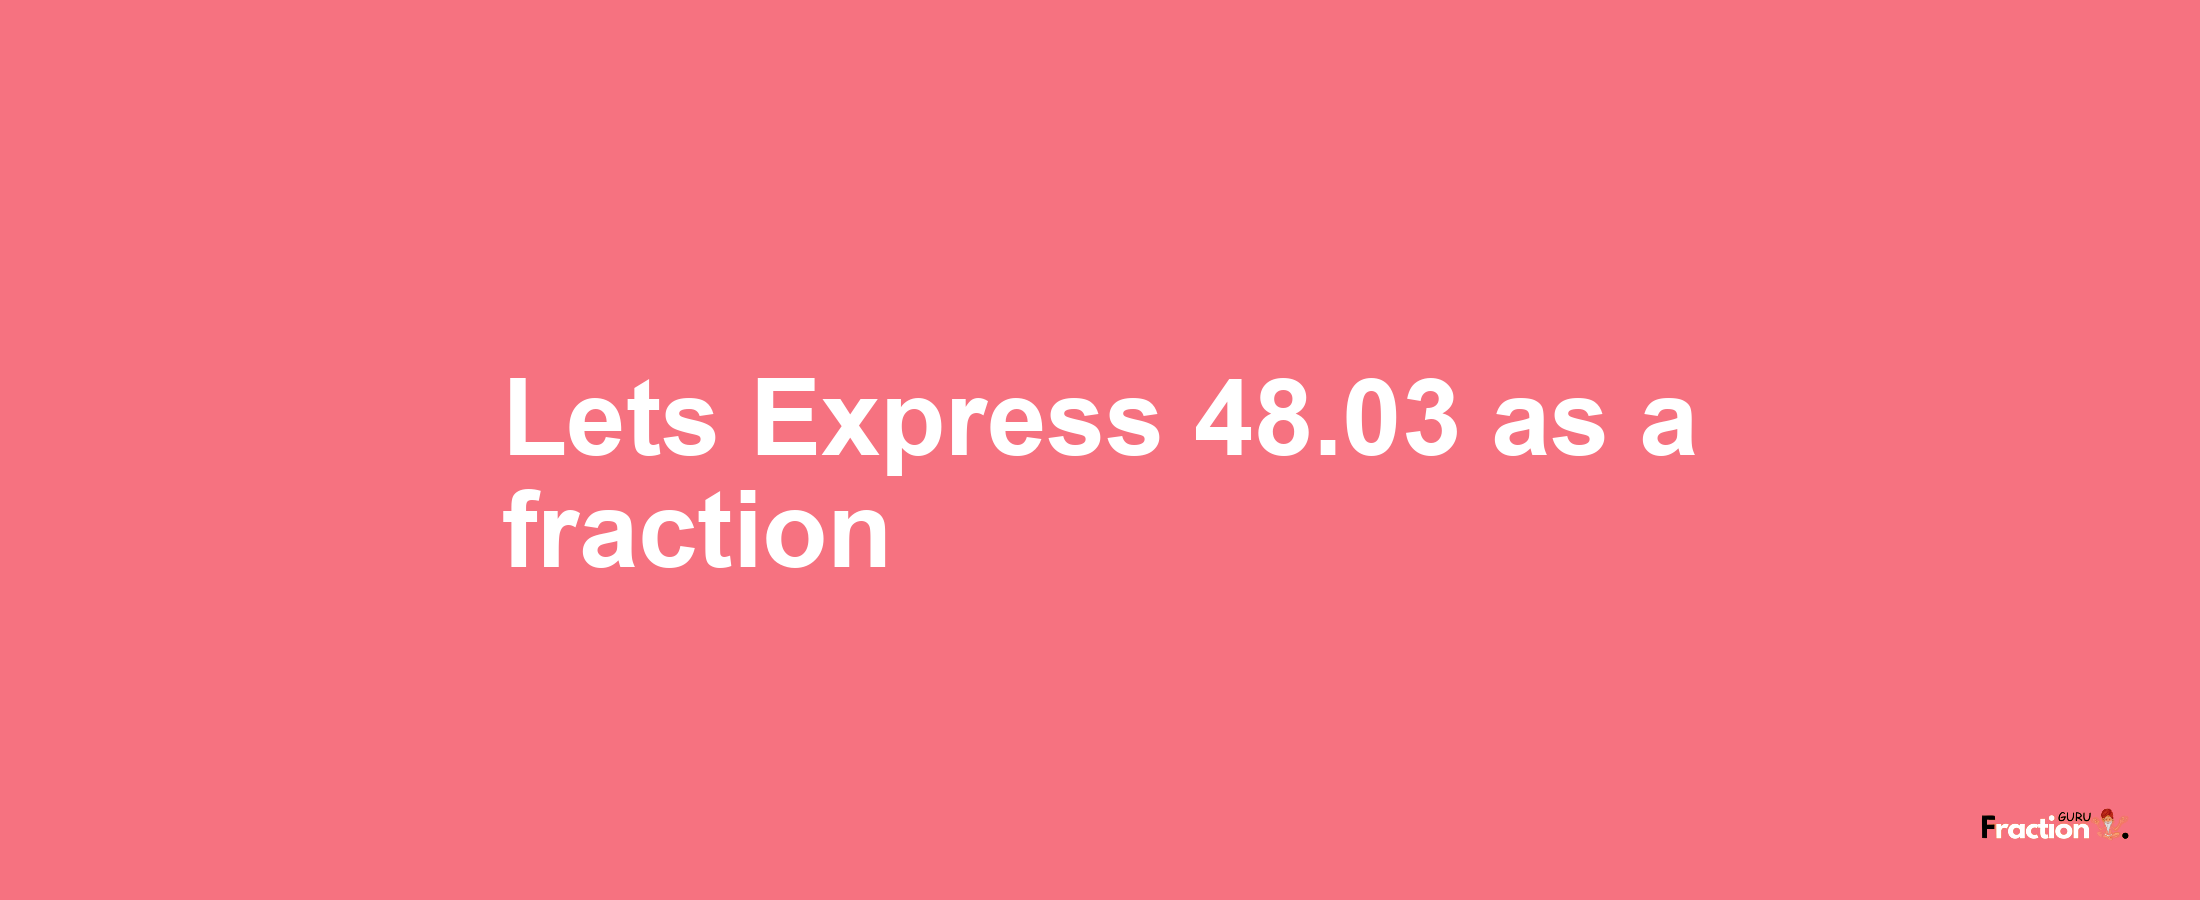 Lets Express 48.03 as afraction